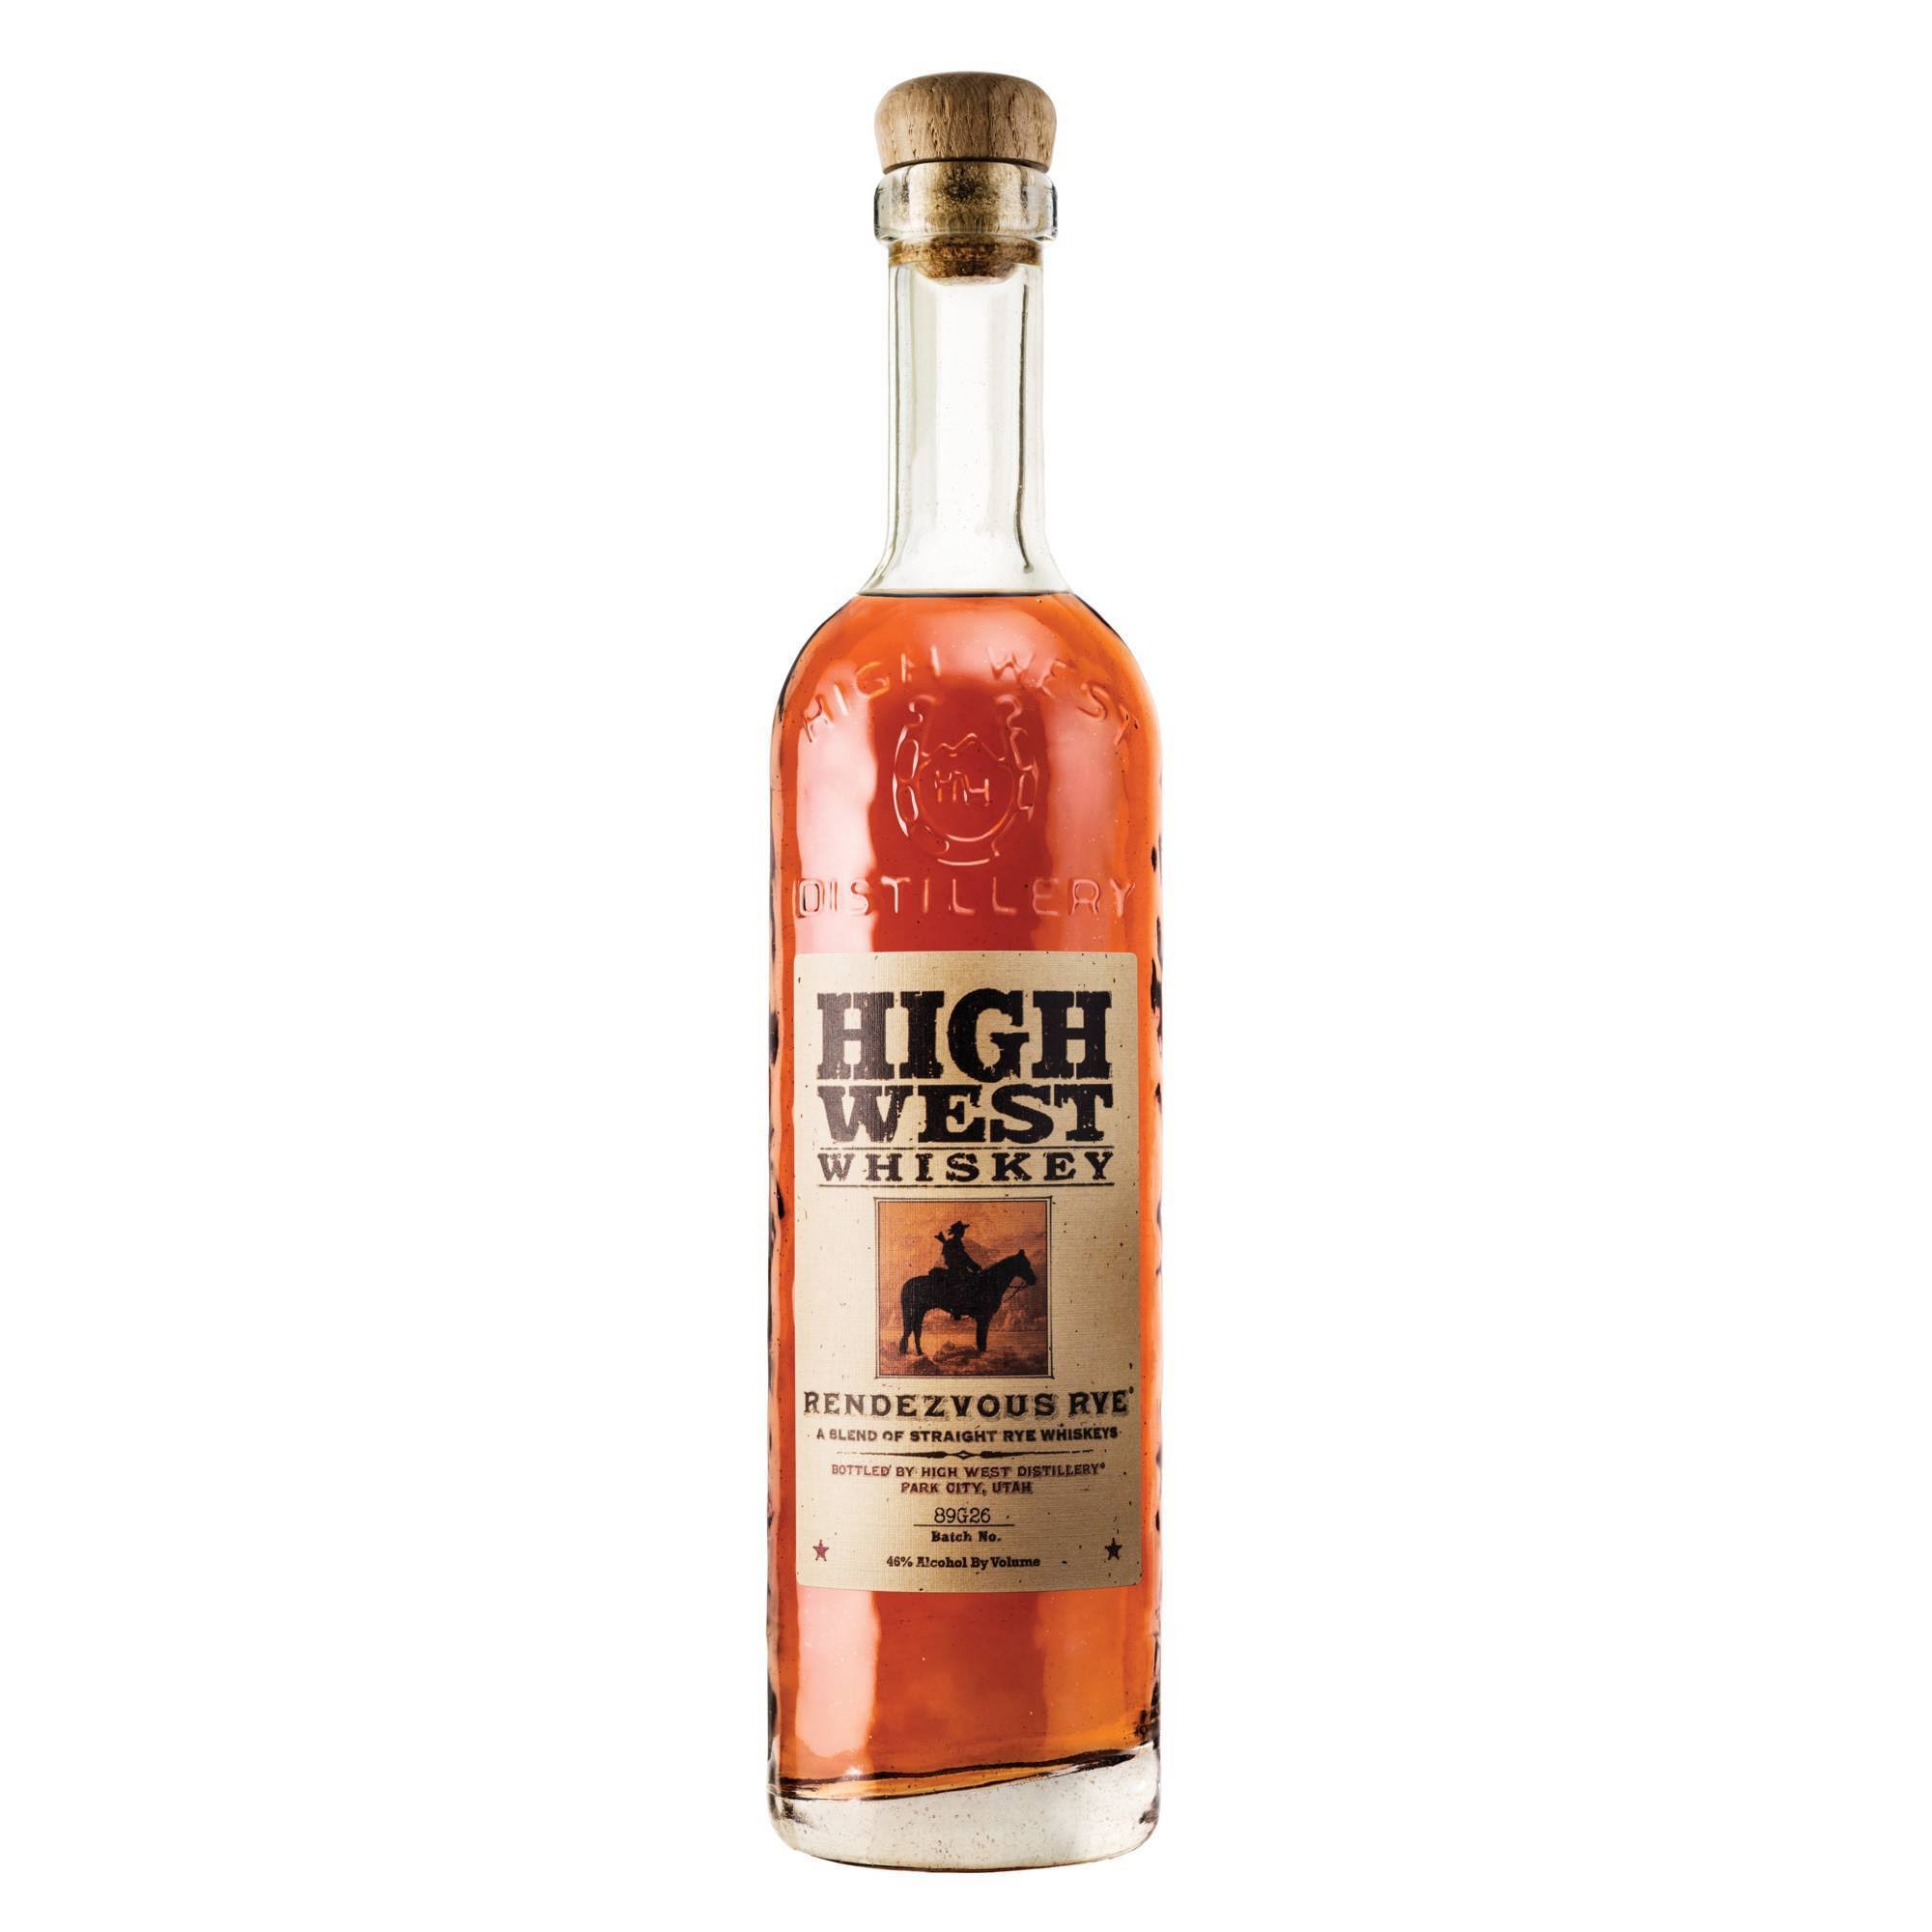 High West Whiskey, Rendezvous Rye - 750 ml